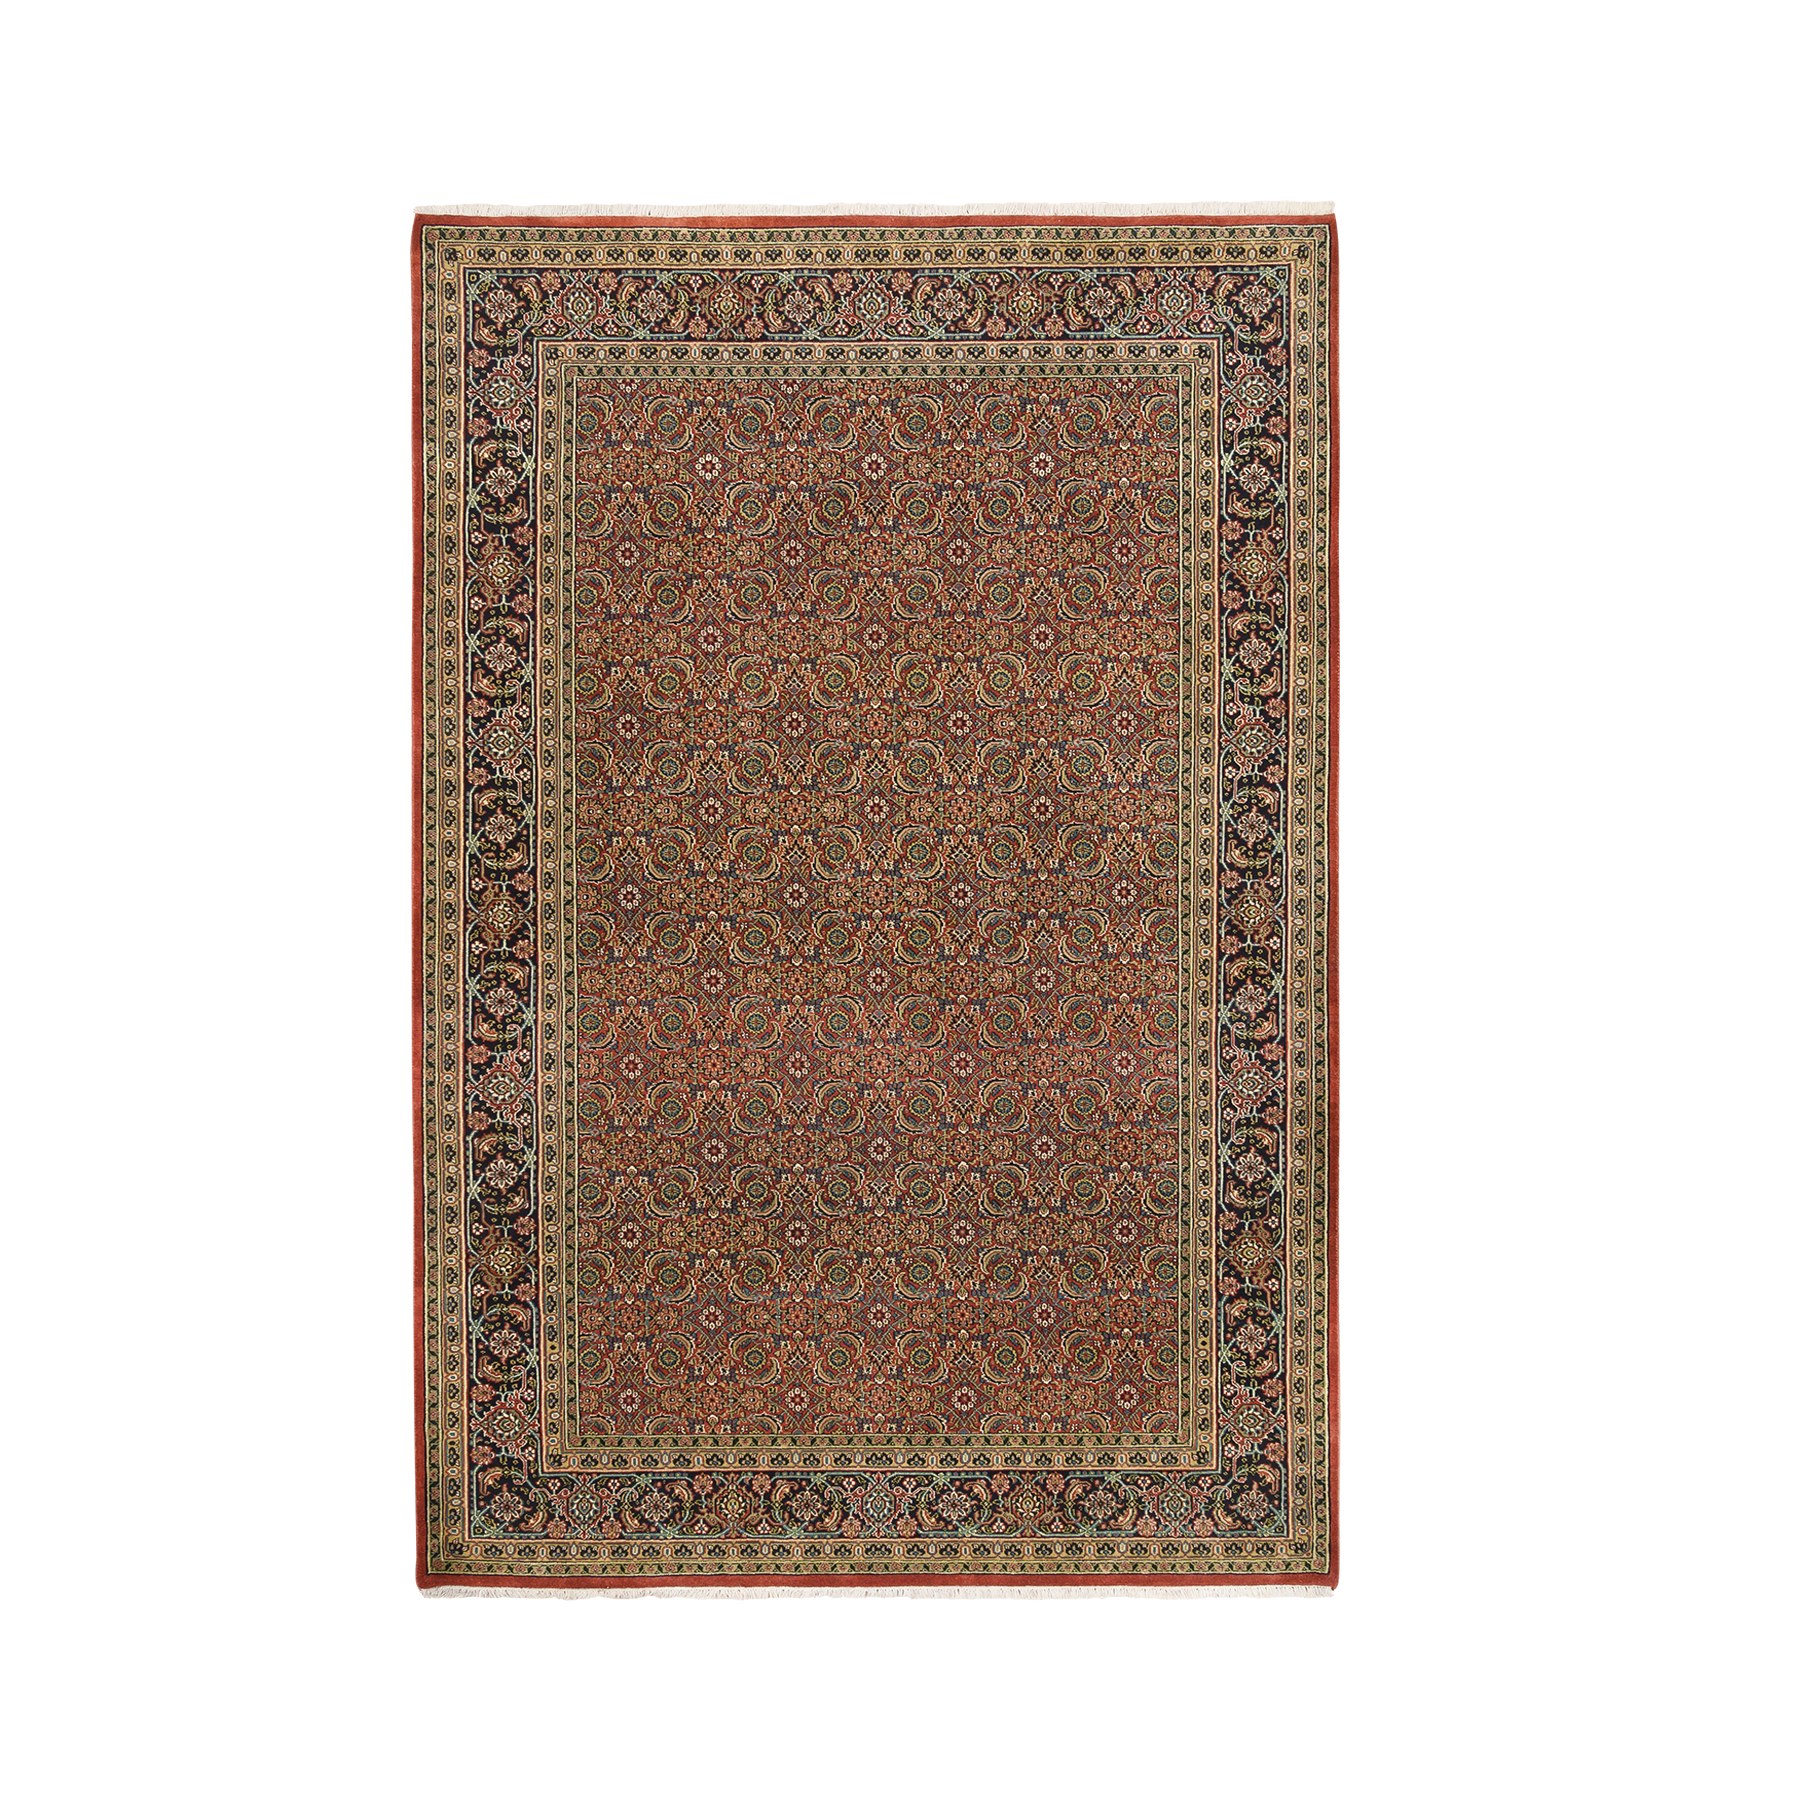 Pirniakan Collection Hand Knotted Red Rug No: 1125986